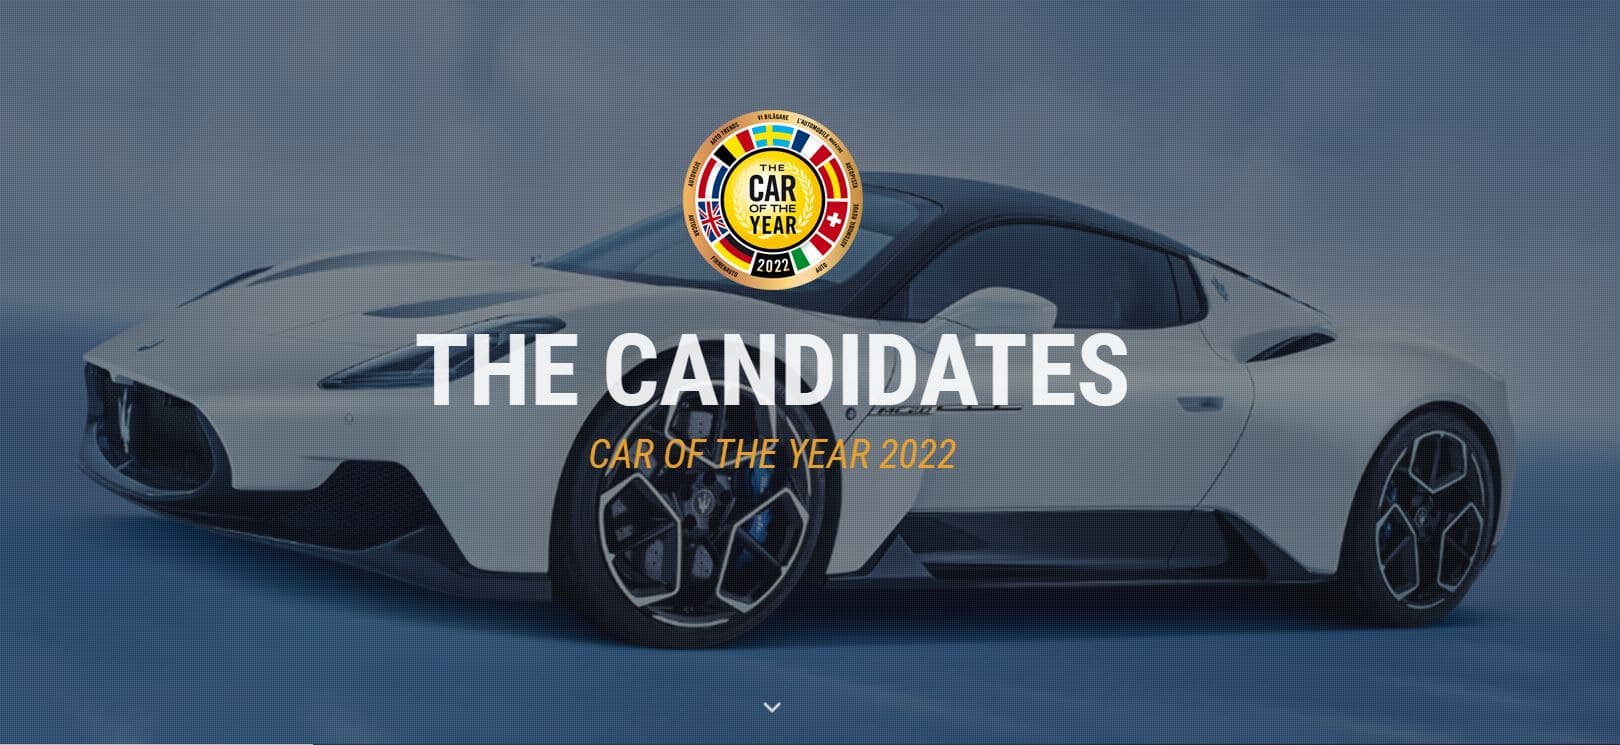 lista car of the year 2022